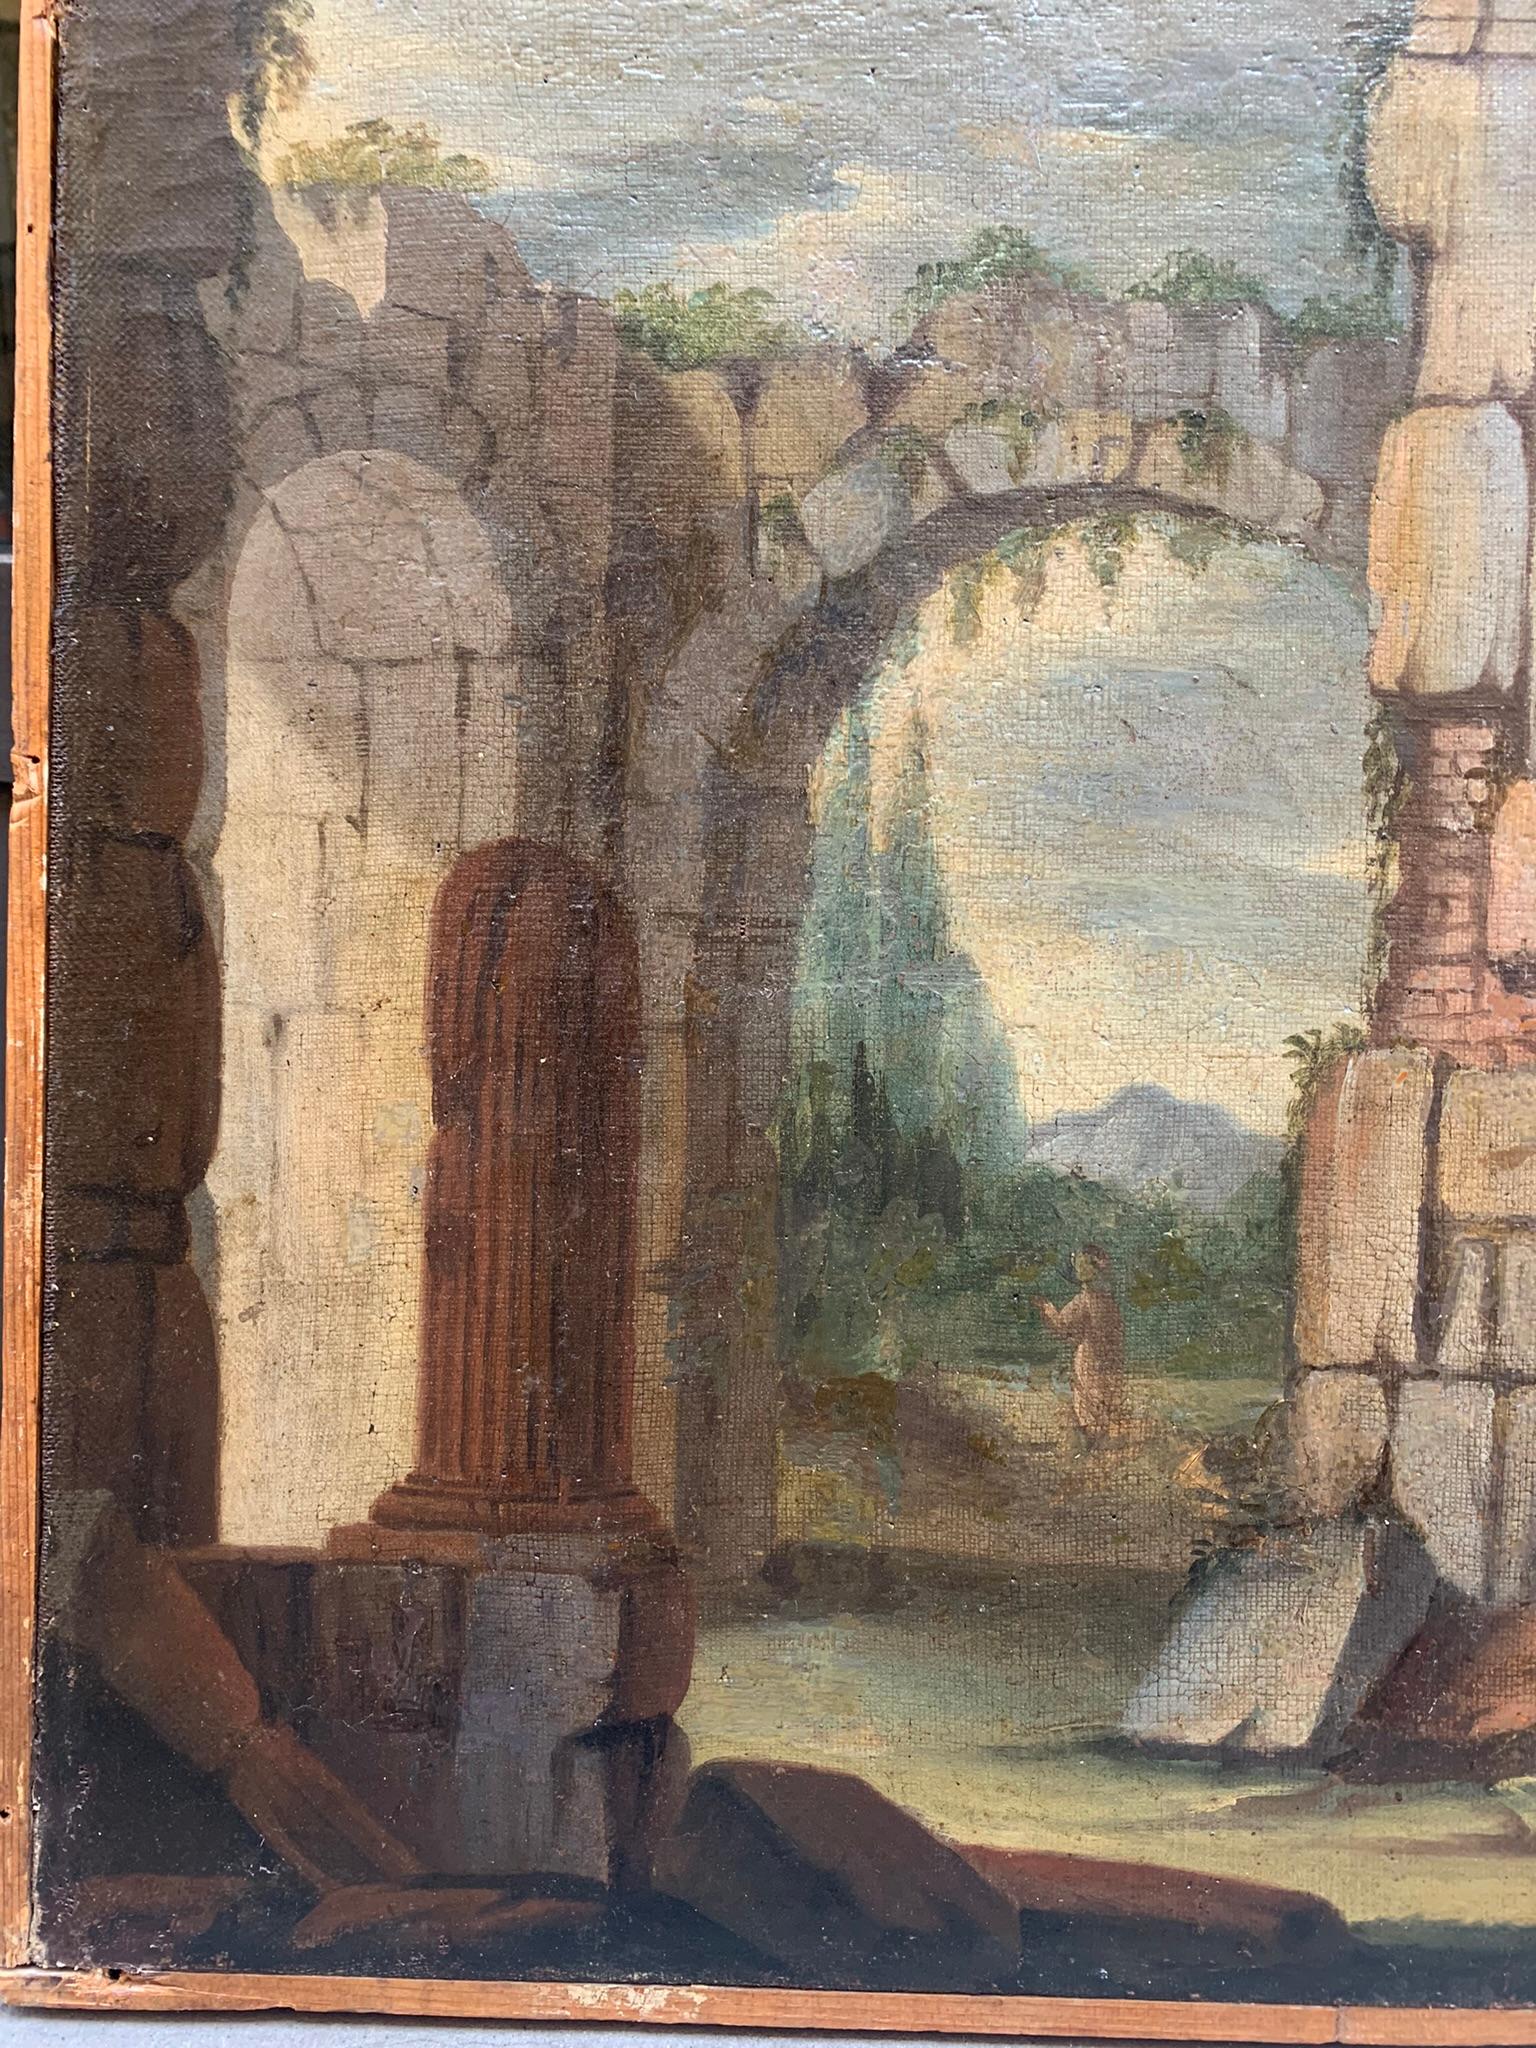 Architectural whimsy with Roman ruins, column and ancient arches.  - Painting by Unknown